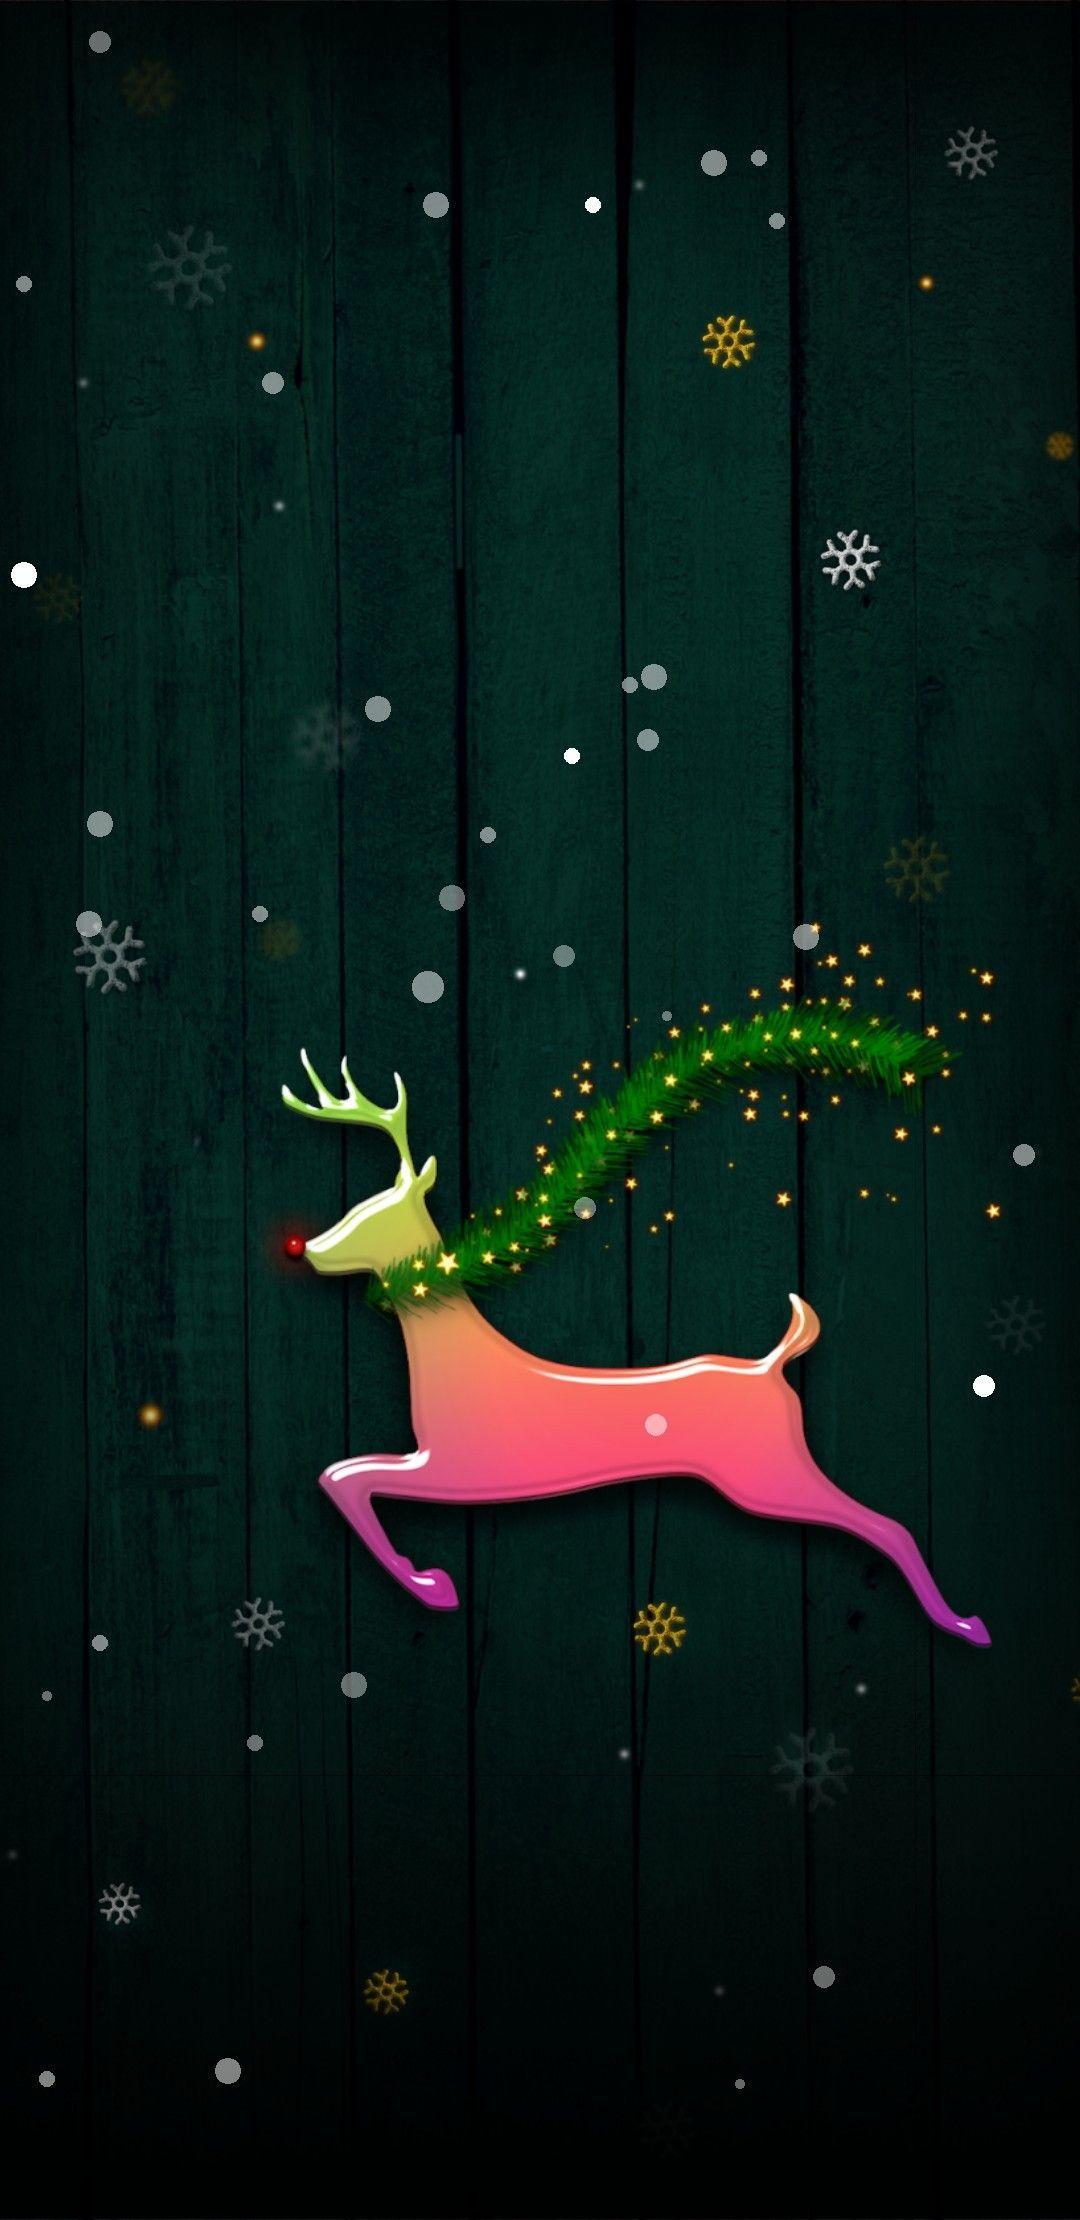 Rudolph Christmas Wallpapers Top Free Rudolph Christmas Images, Photos, Reviews